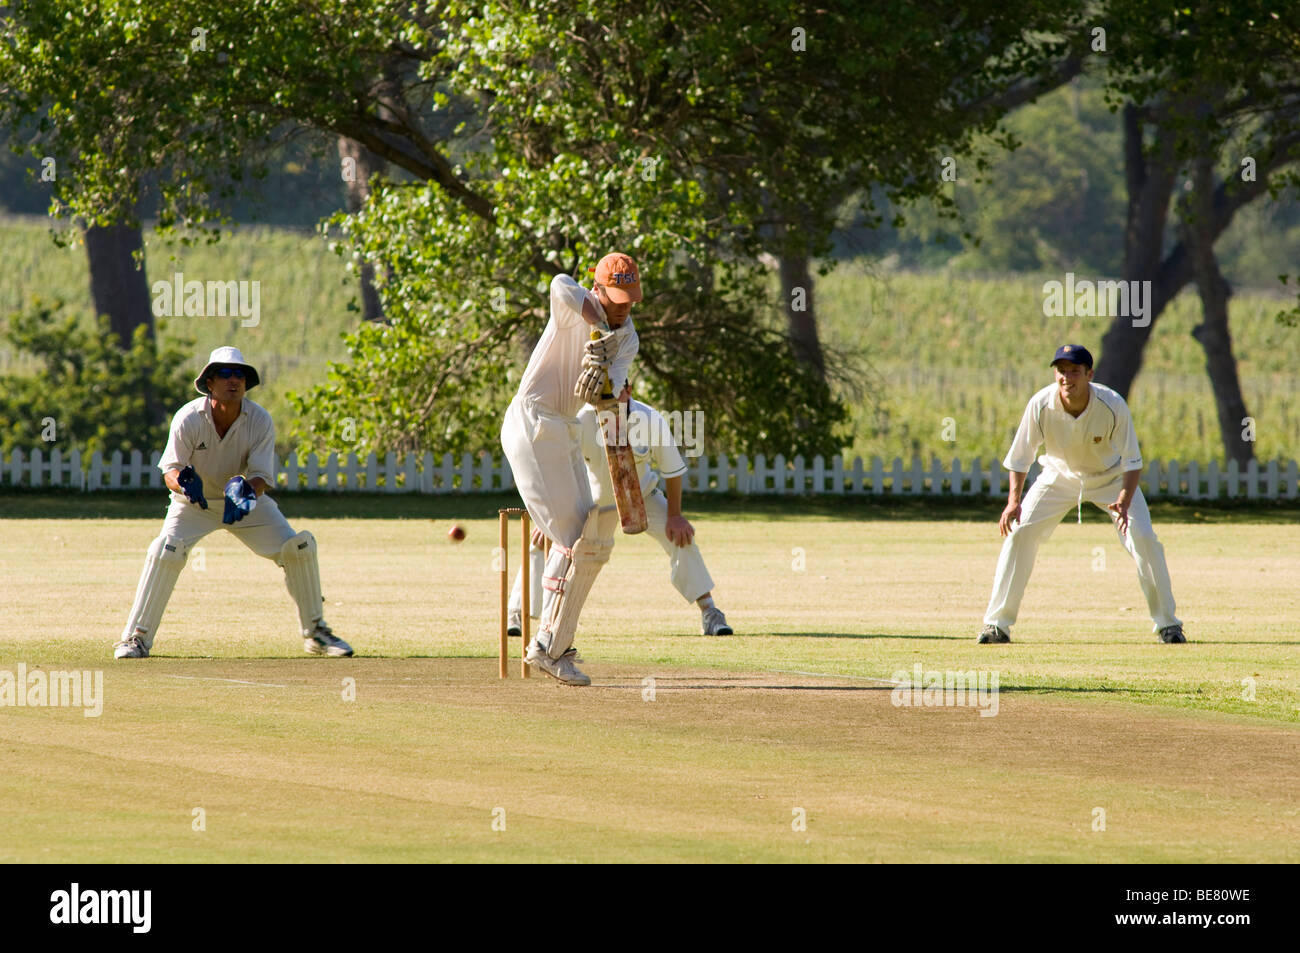 People playing cricket at uitsig Cricket Club, Constania, Cape Town, South Africa, Africa Stock Photo